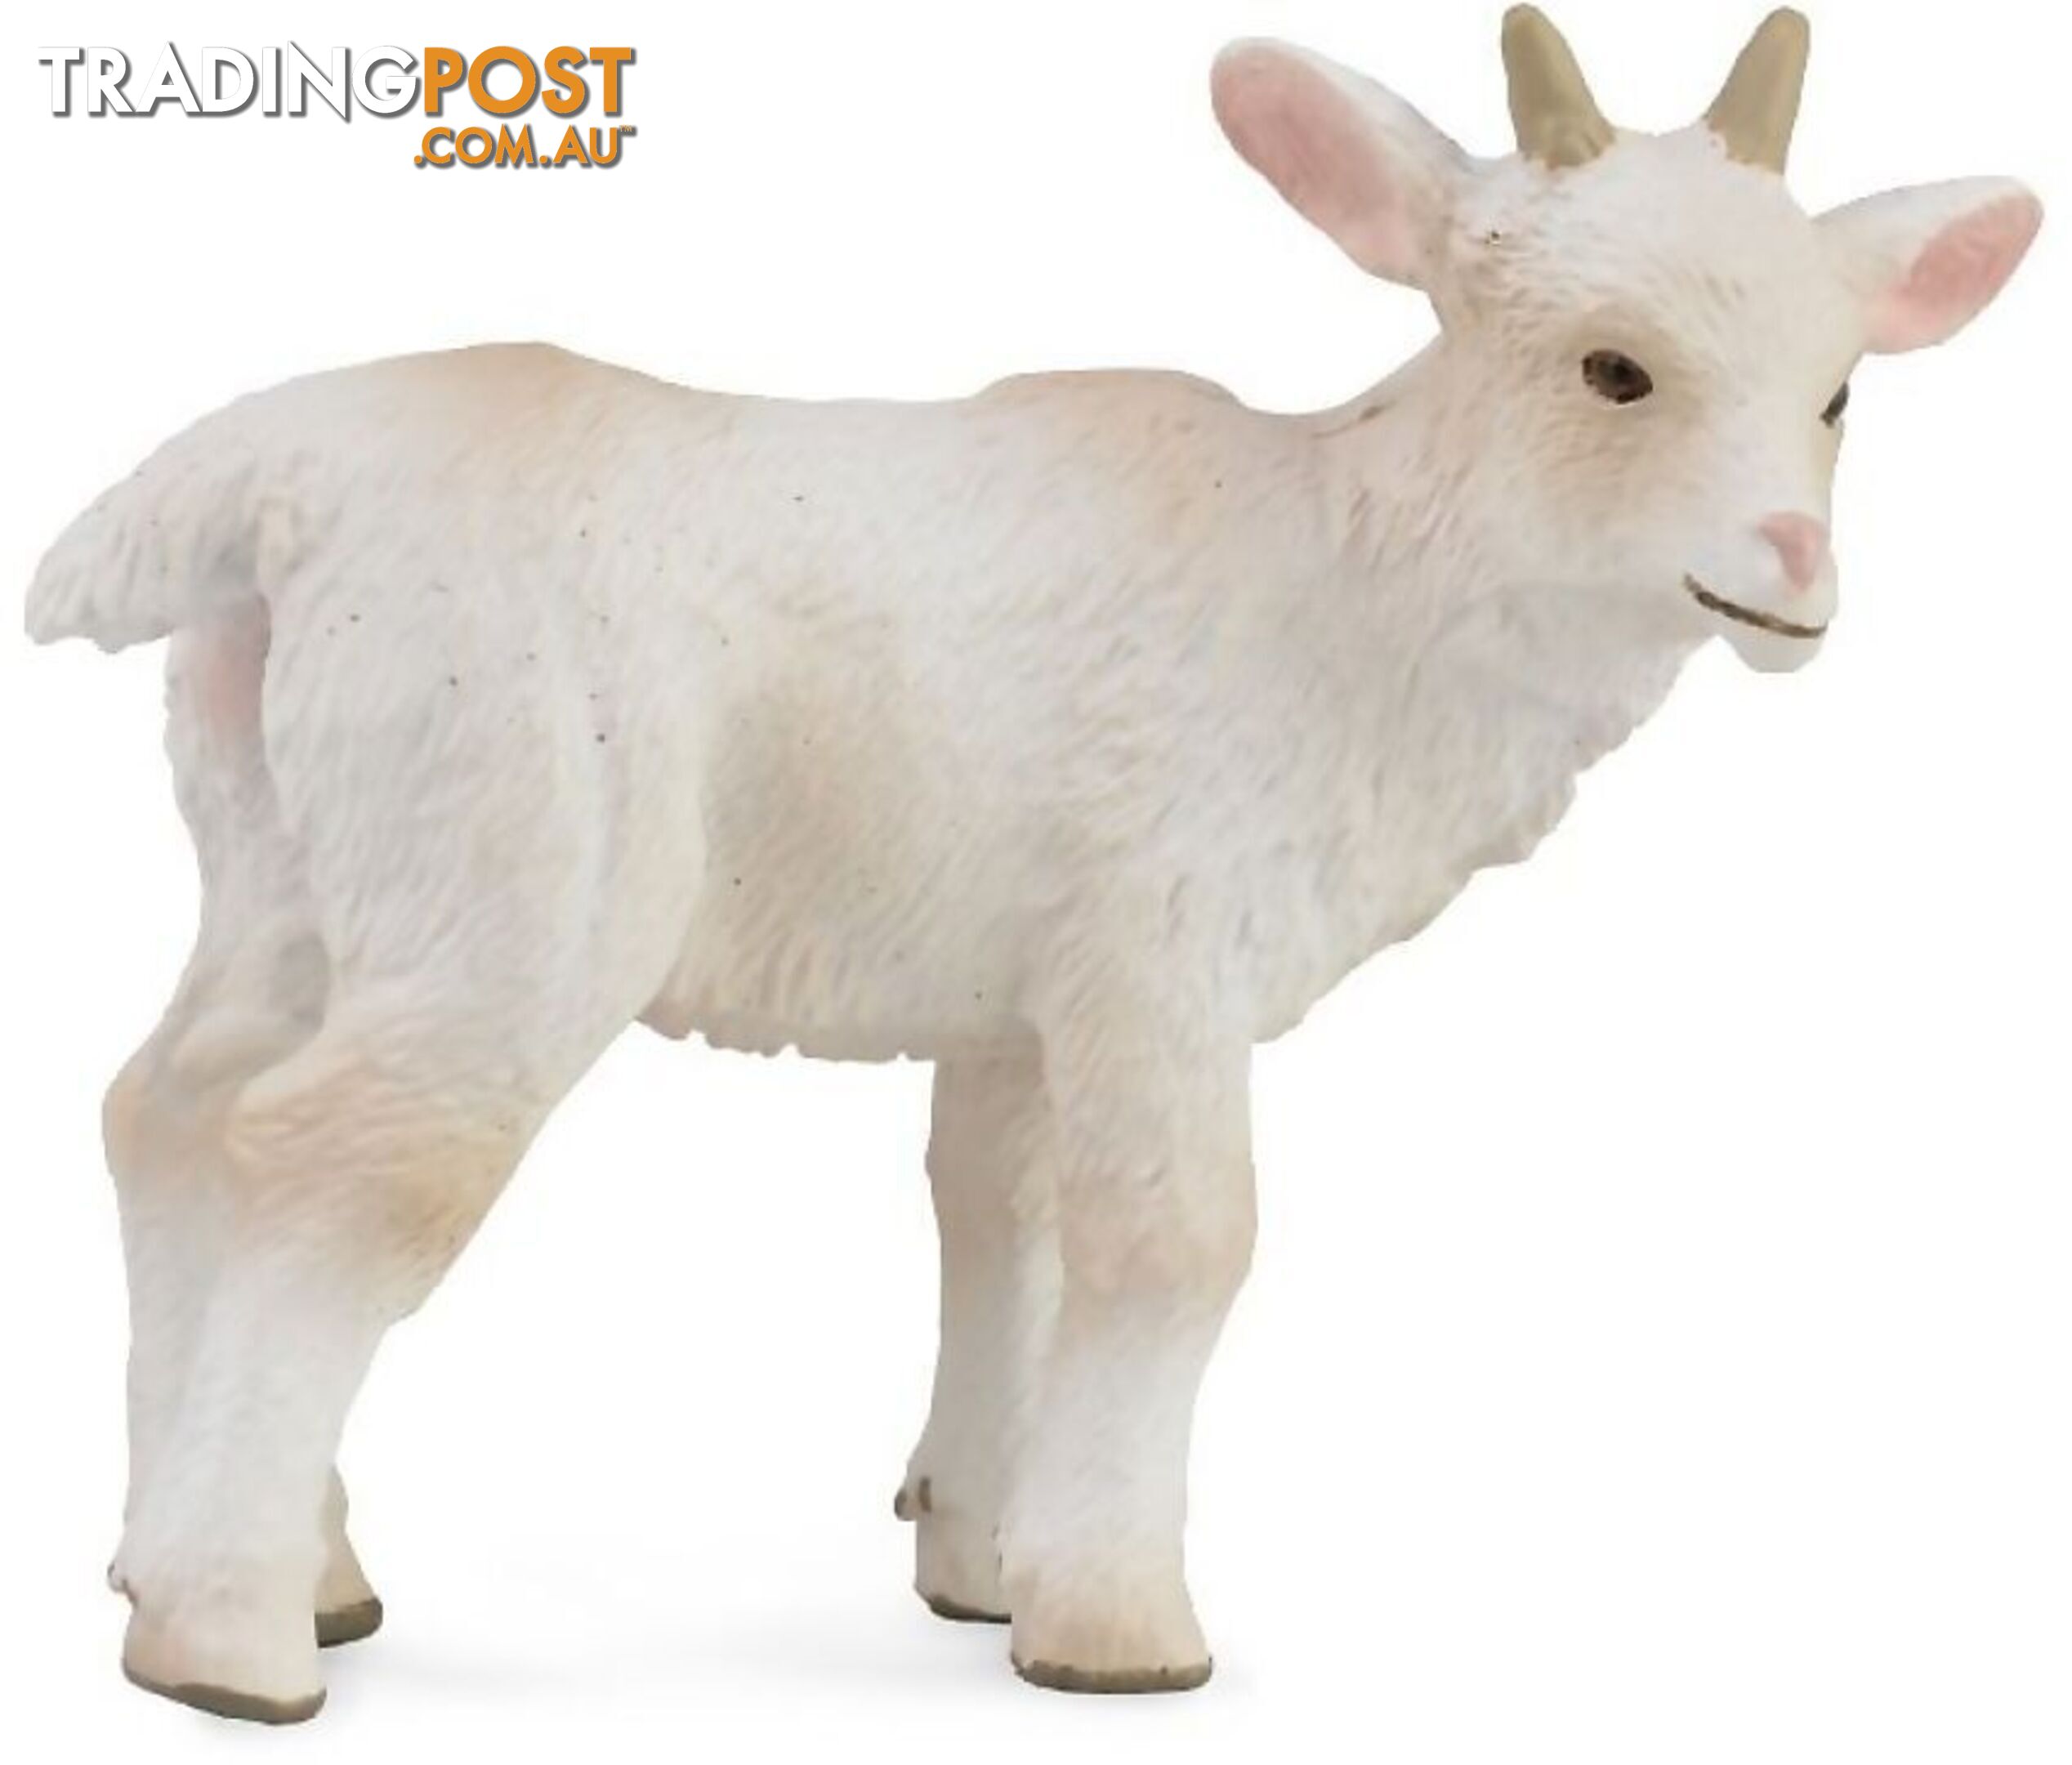 CollectA - Goat Kid Standing Small Animal Figurine - Rpco88786 - 4892900887869